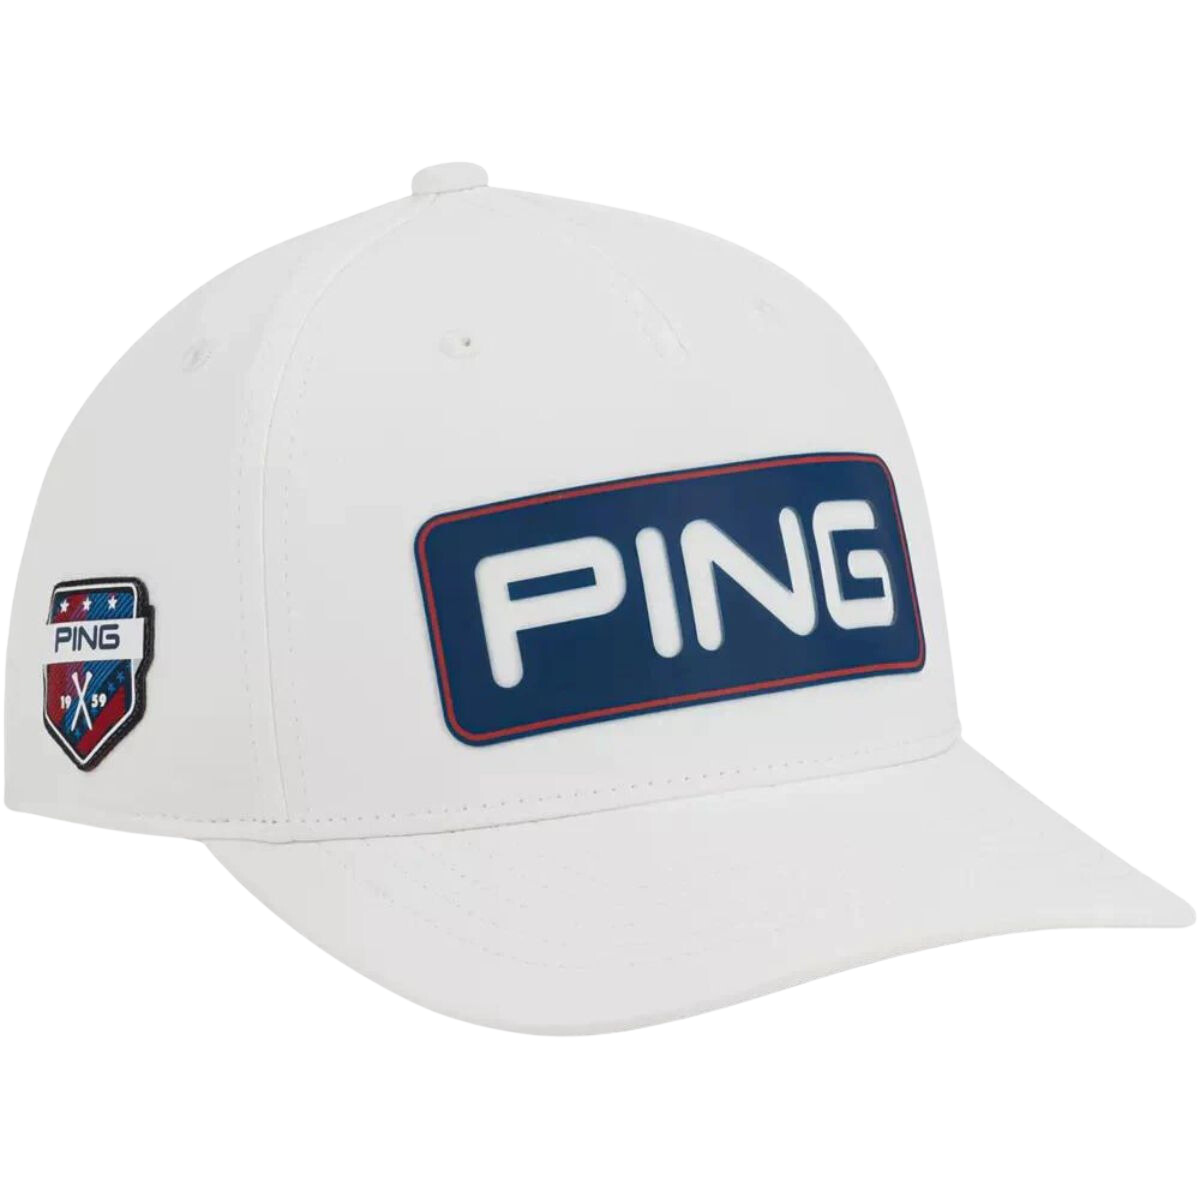 Ping Stars and Stripes Tour Snapback 23